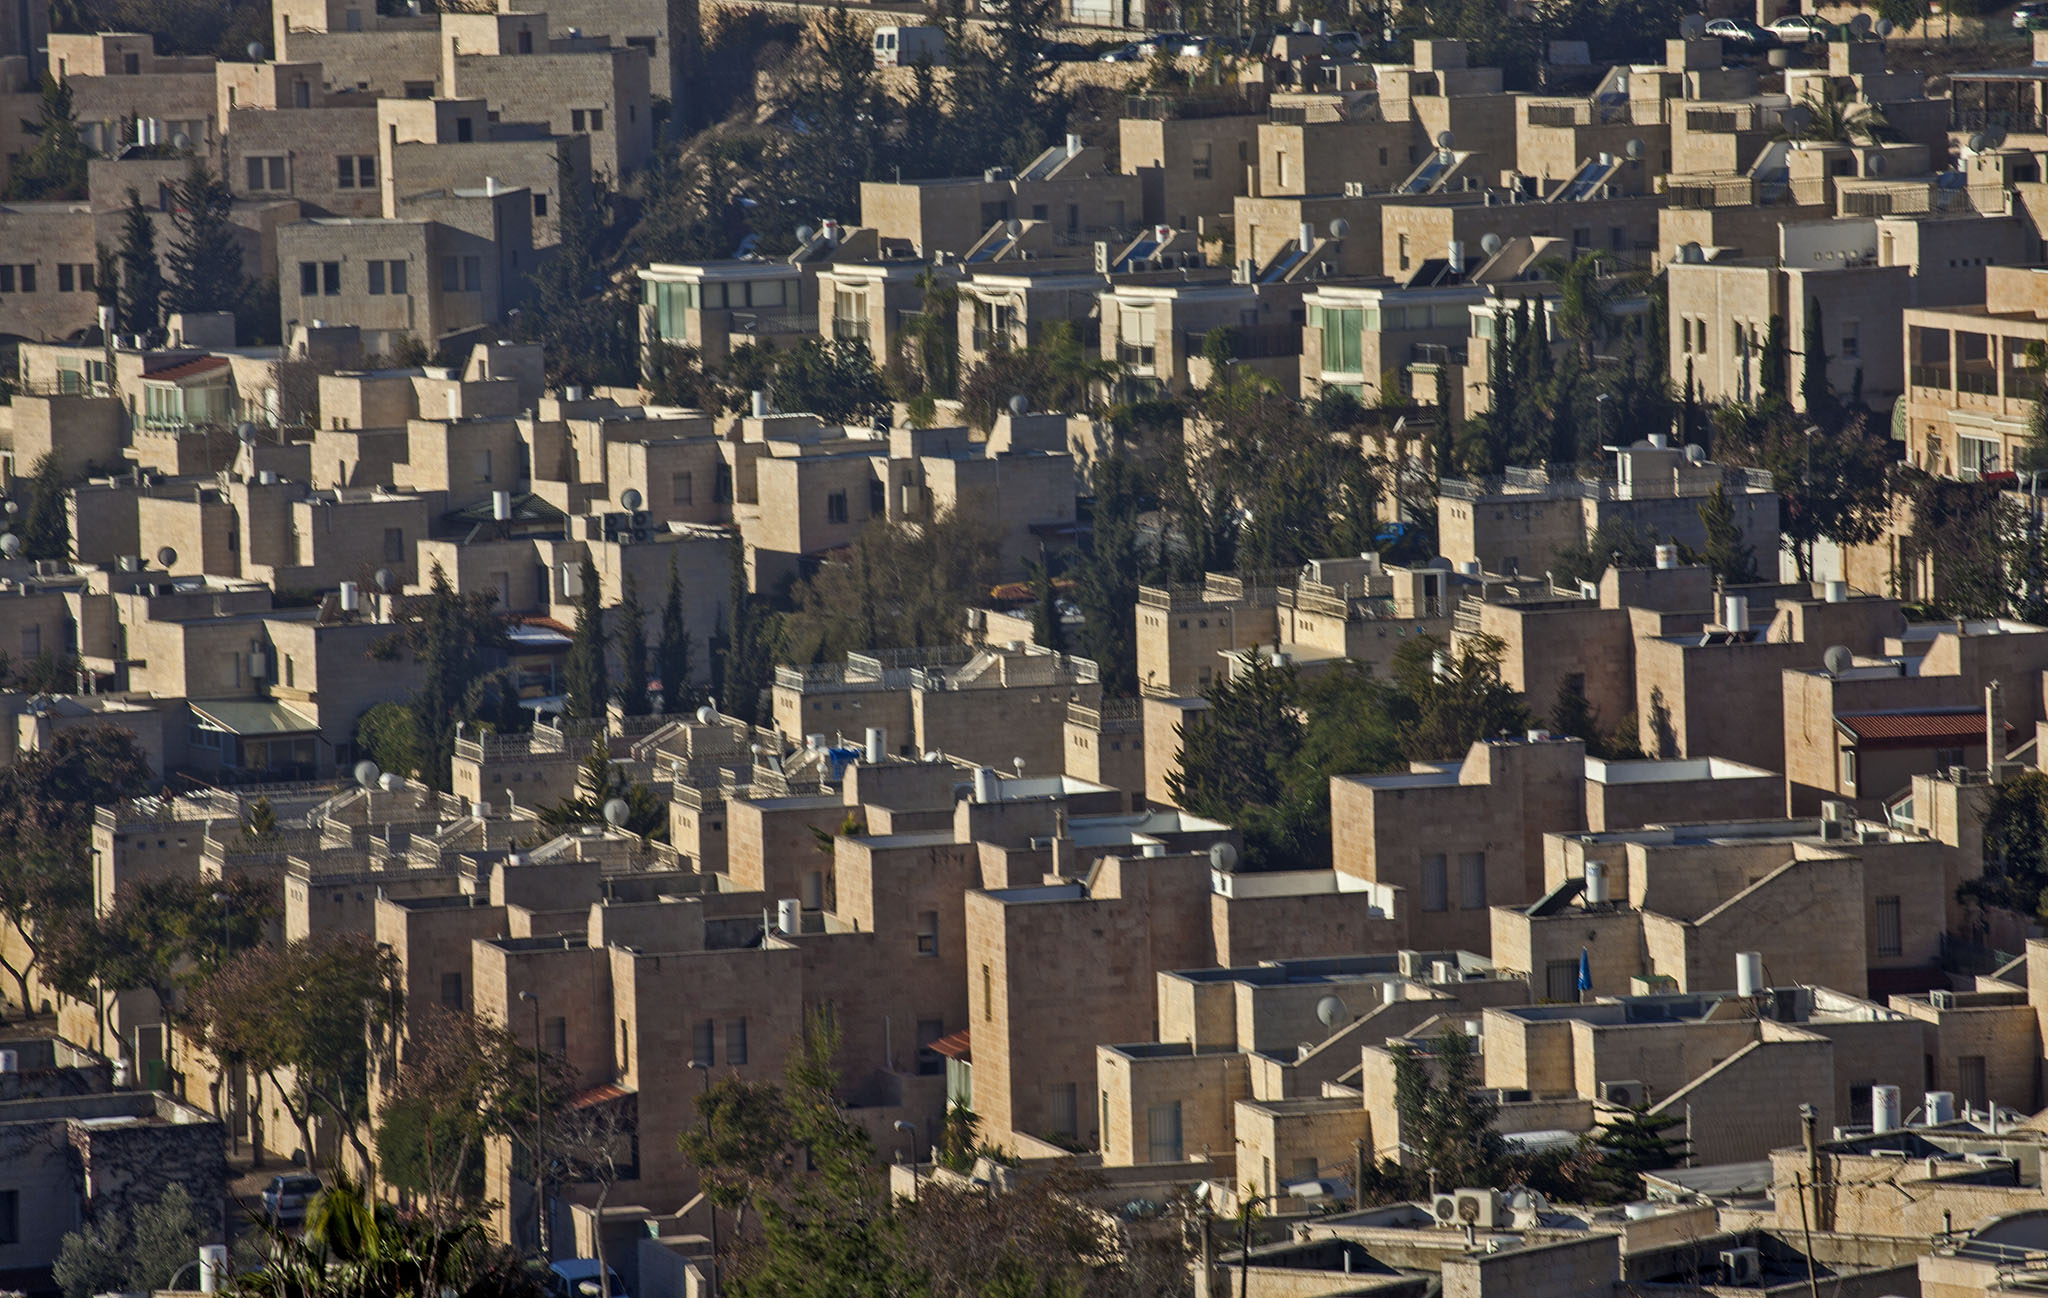 a bird's eye view of buildings in an urban area